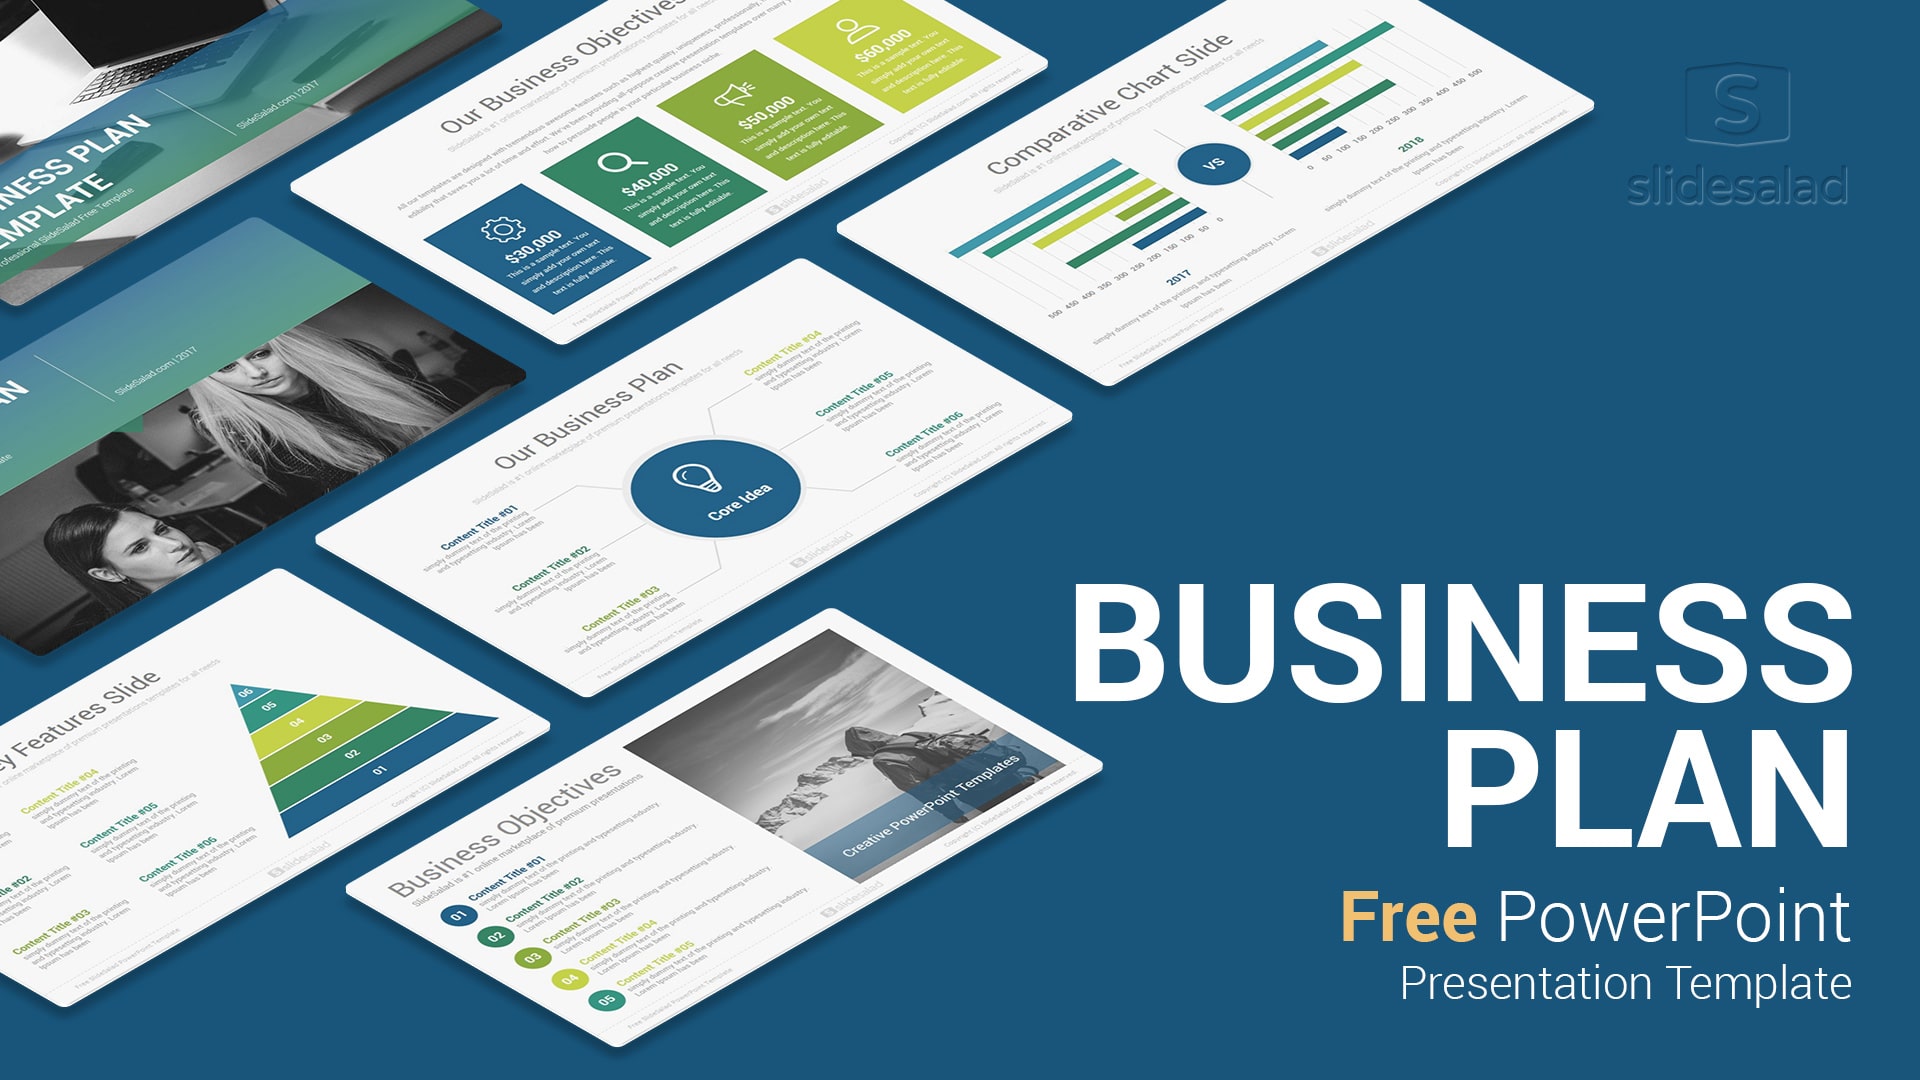 Business Plan Free PowerPoint Presentation Template - SlideSalad Intended For Business Plan Presentation Template Ppt